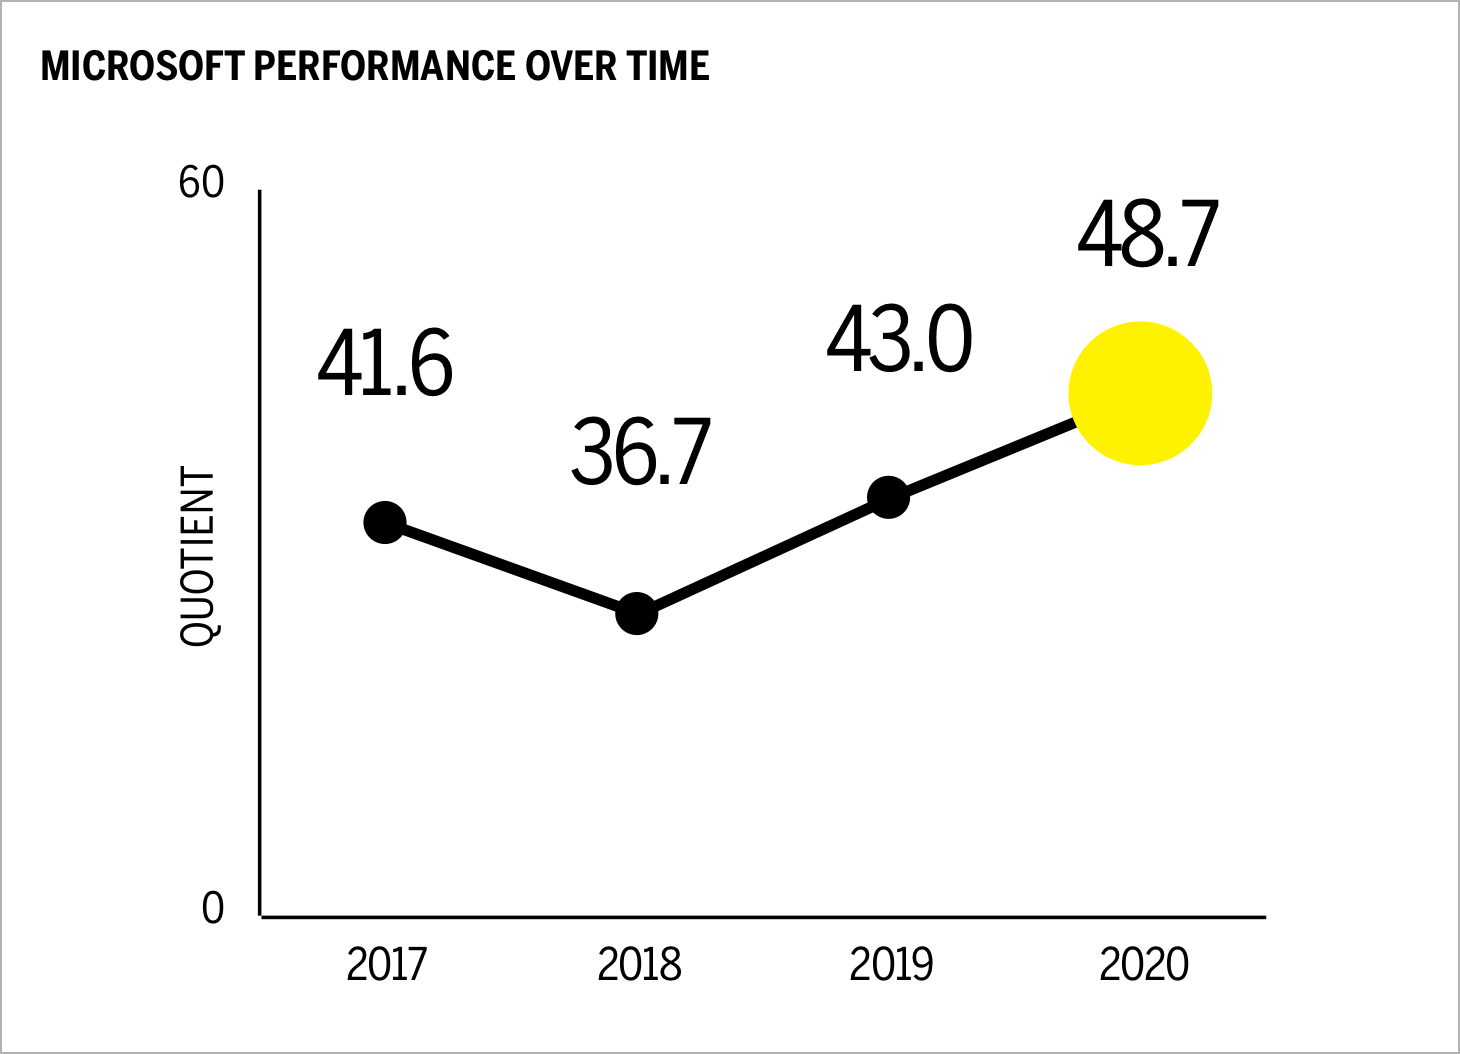 Microsoft performance over time